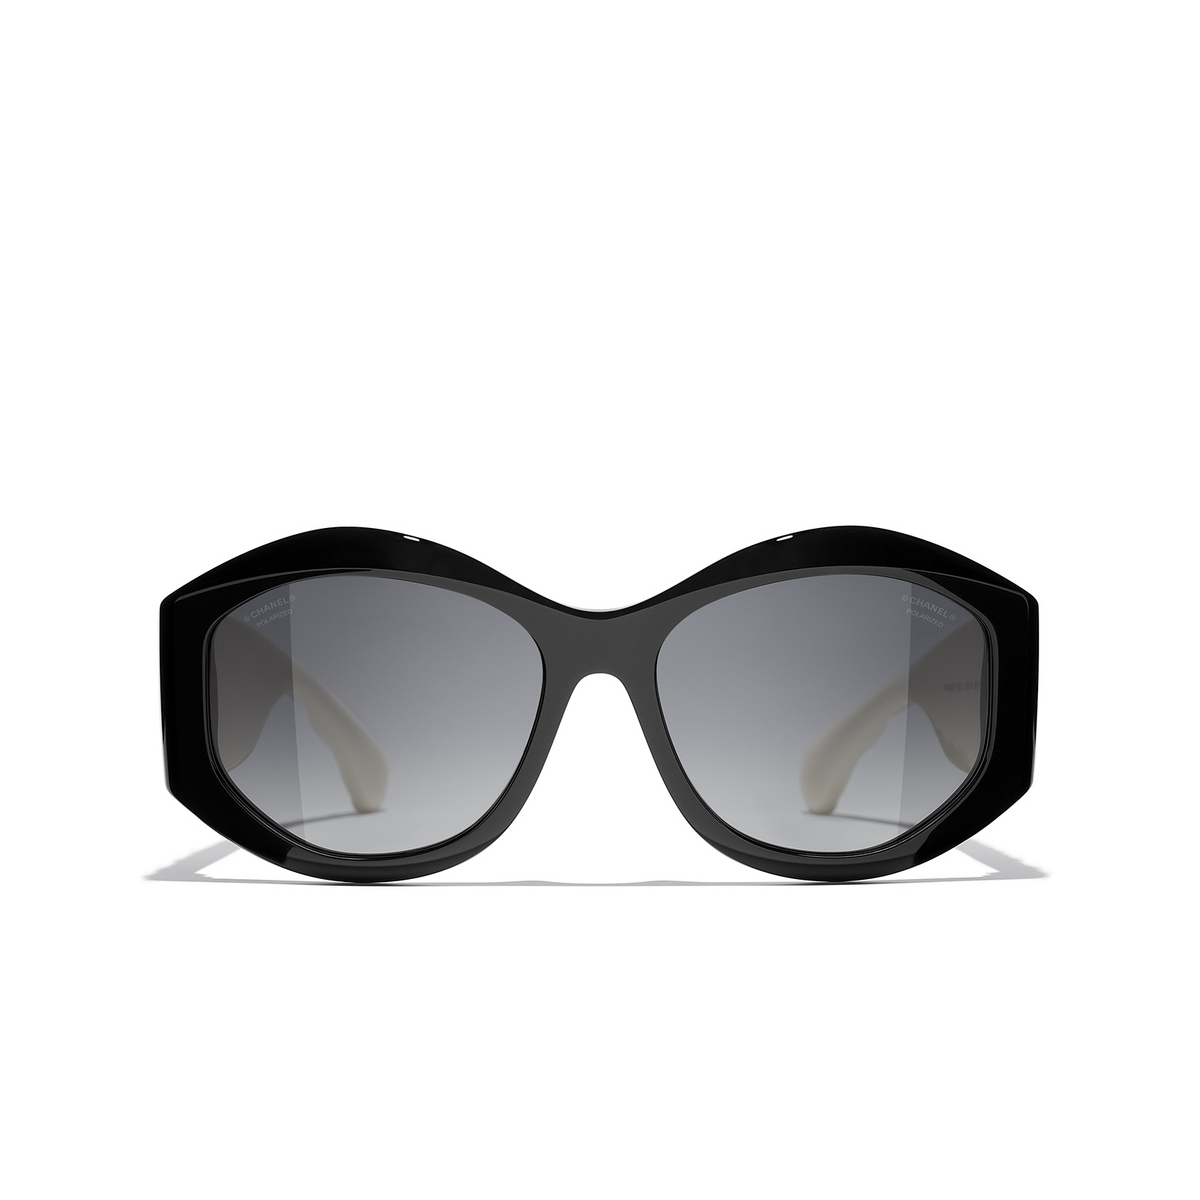 CHANEL oval Sunglasses 1656S8 Black & White - front view